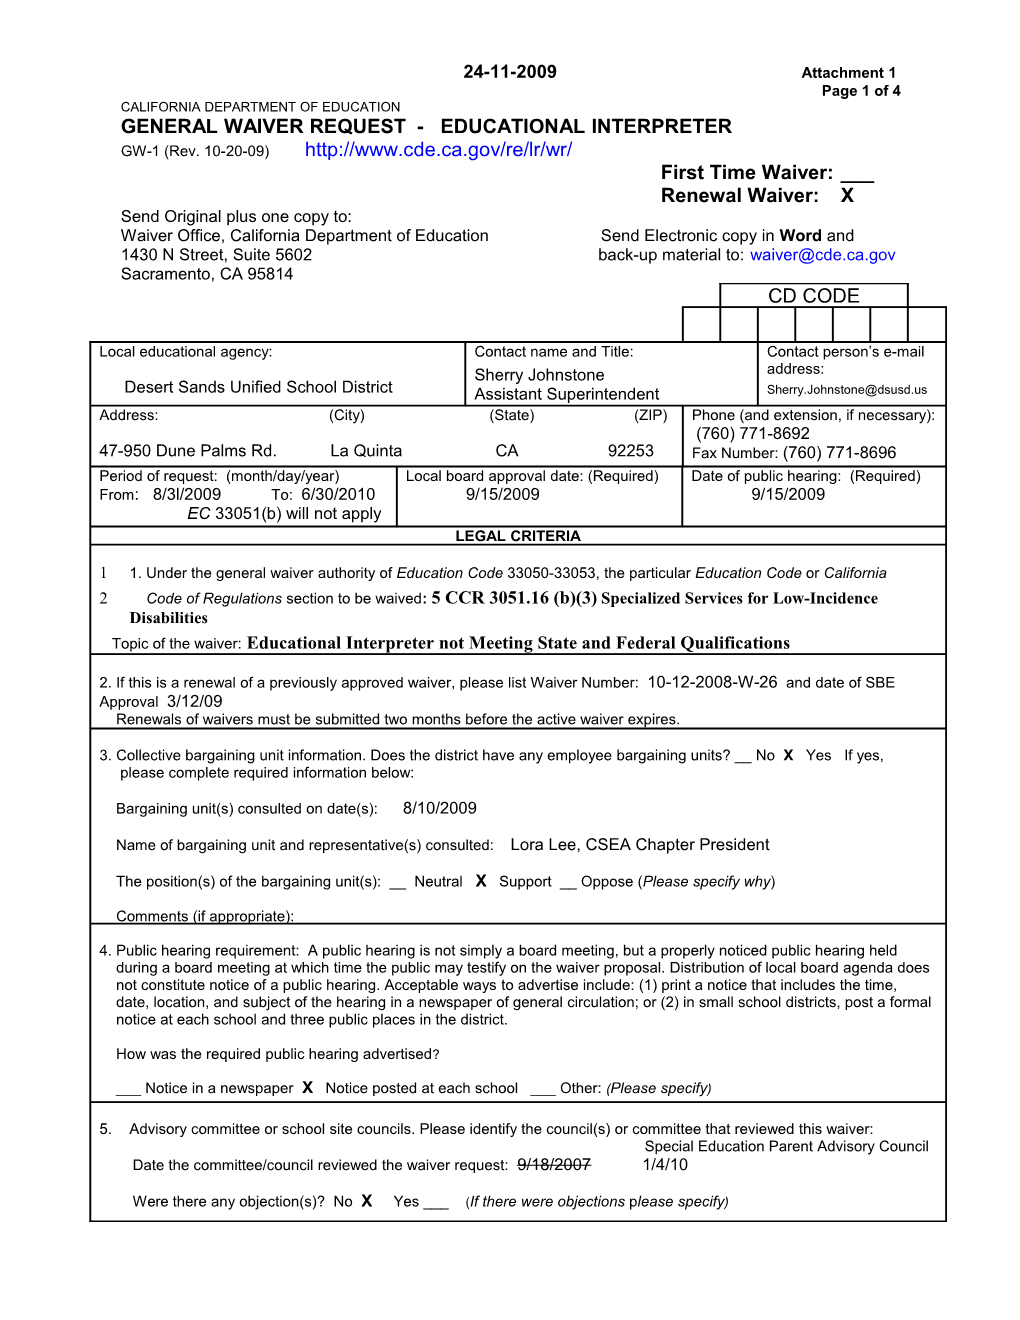 March 2010 Waiver Item W18 Attachment 1 Meeting Agendas (CA State Board of Education)